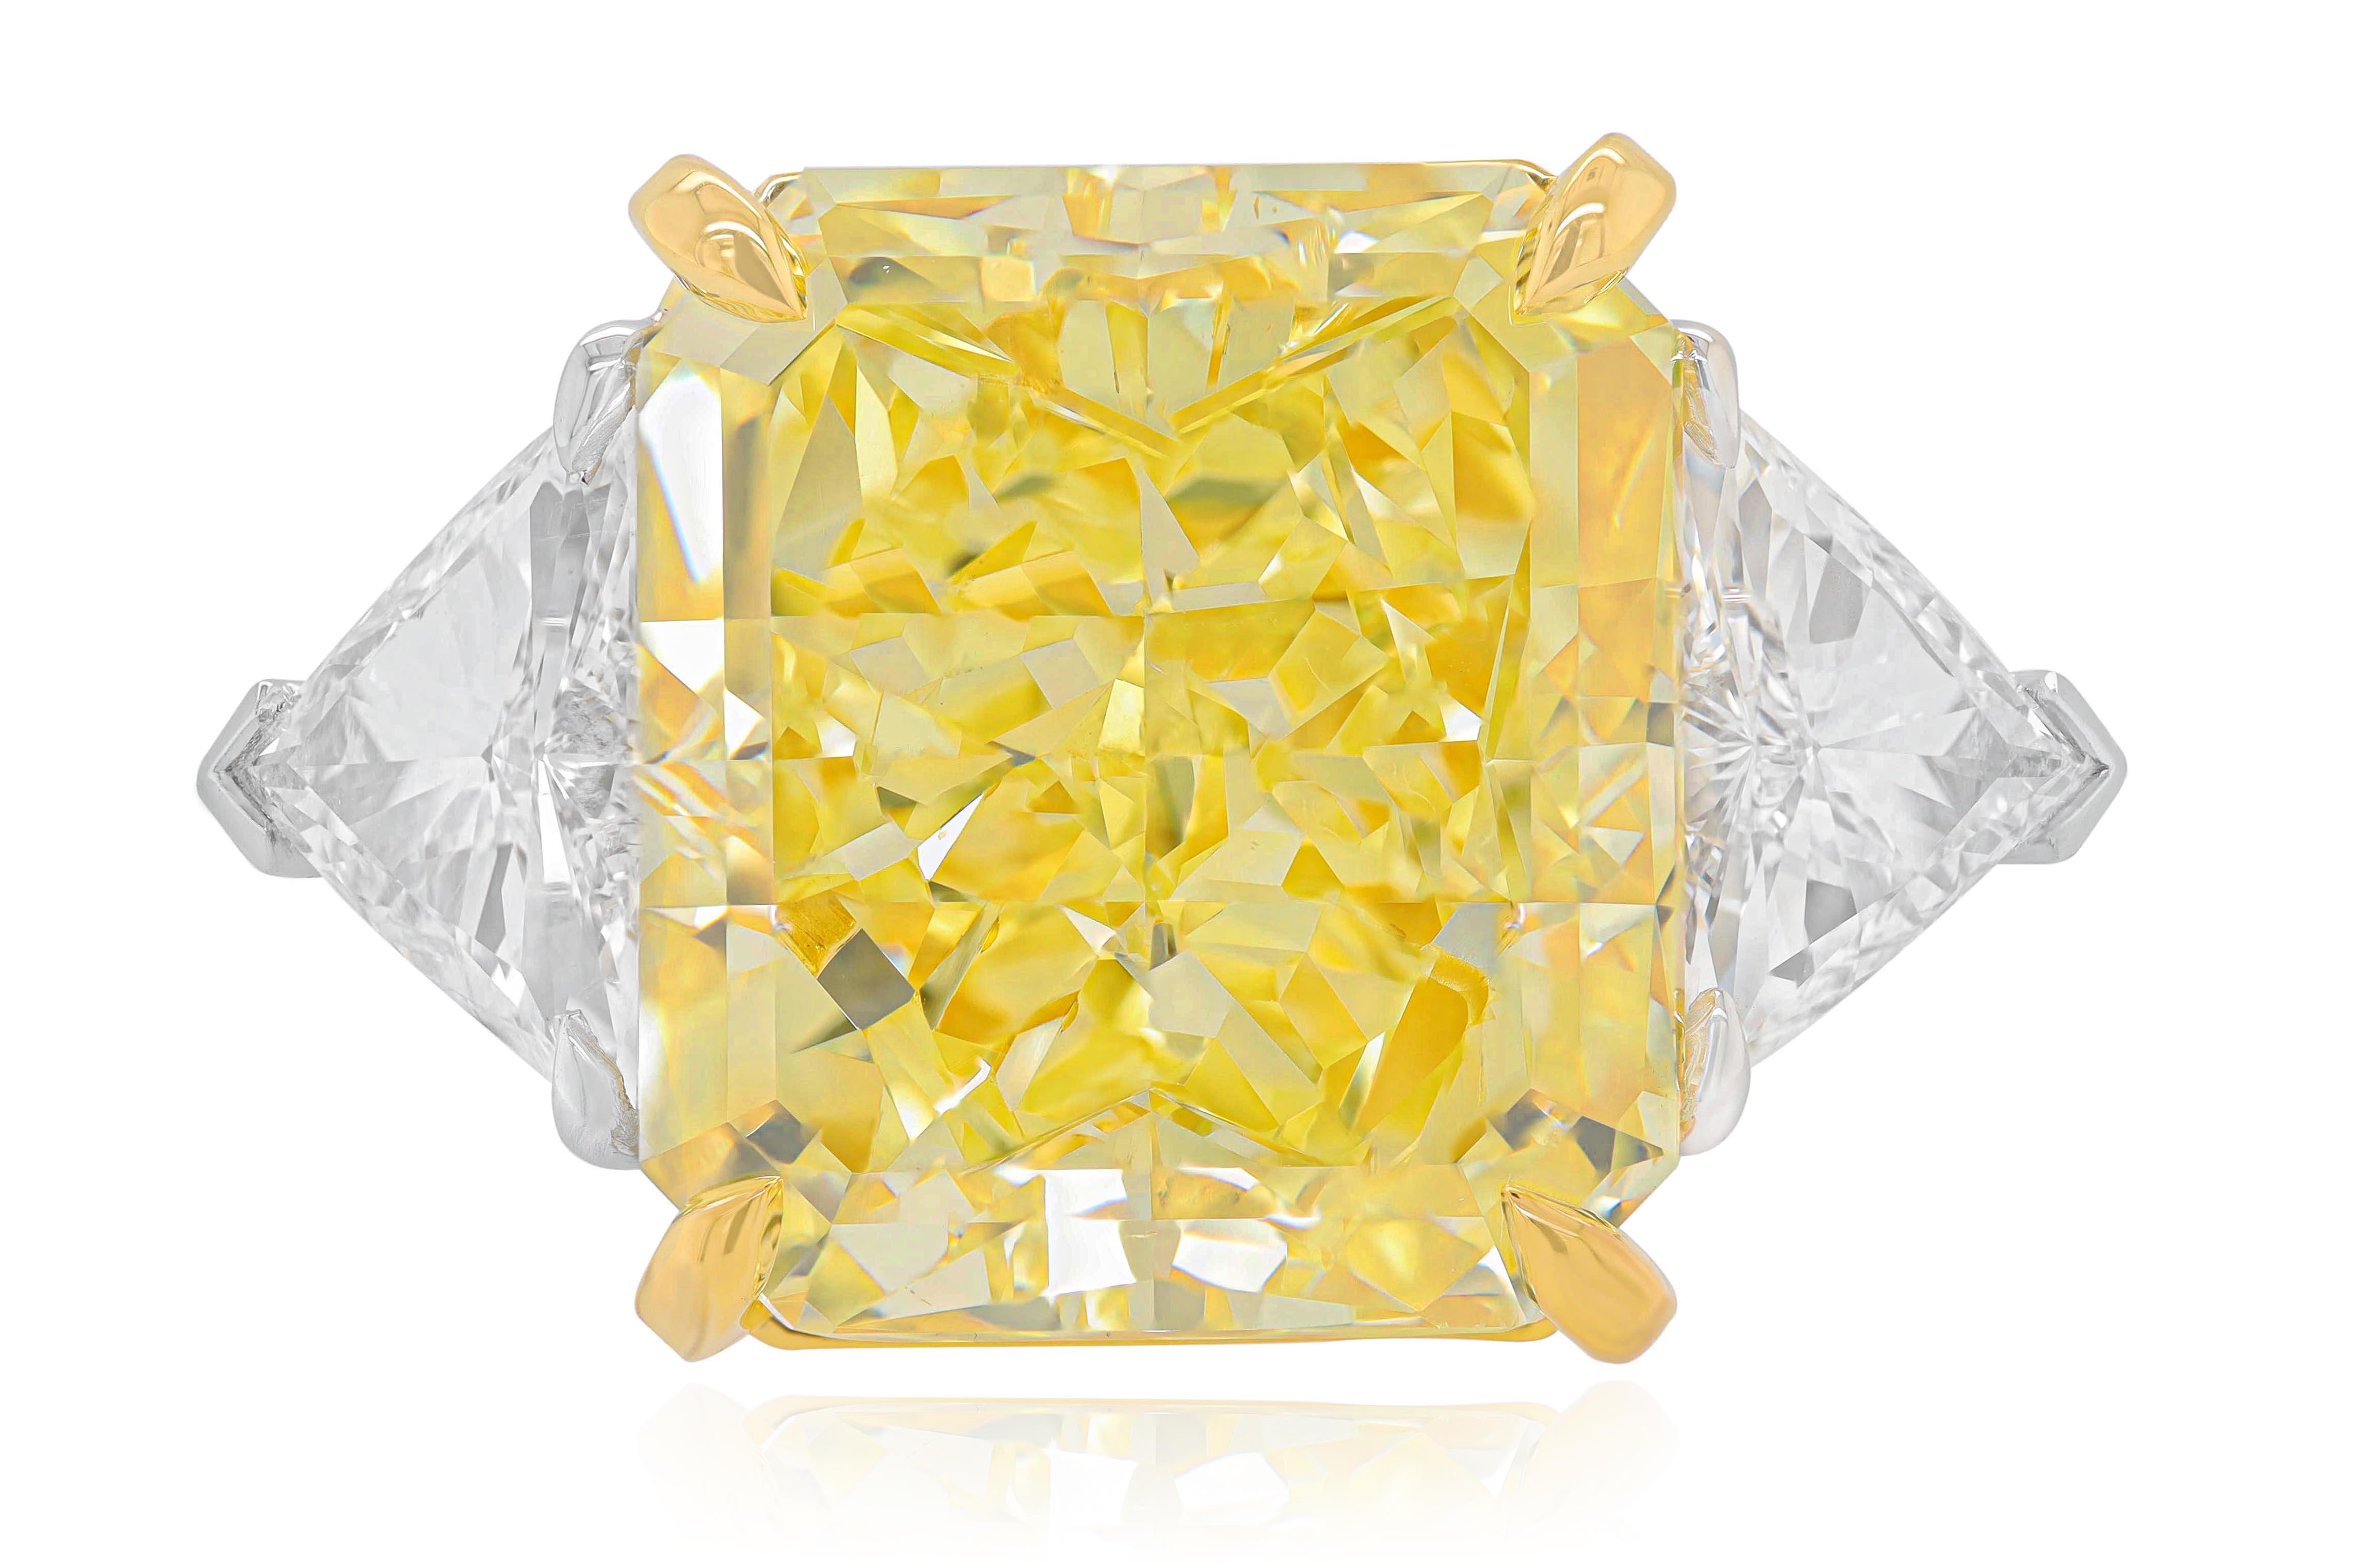 Radiant Cut Diana M. Fancy Intense Yellow Diamond 23.88cts VS2 Set with 2cts Trillions GIA For Sale